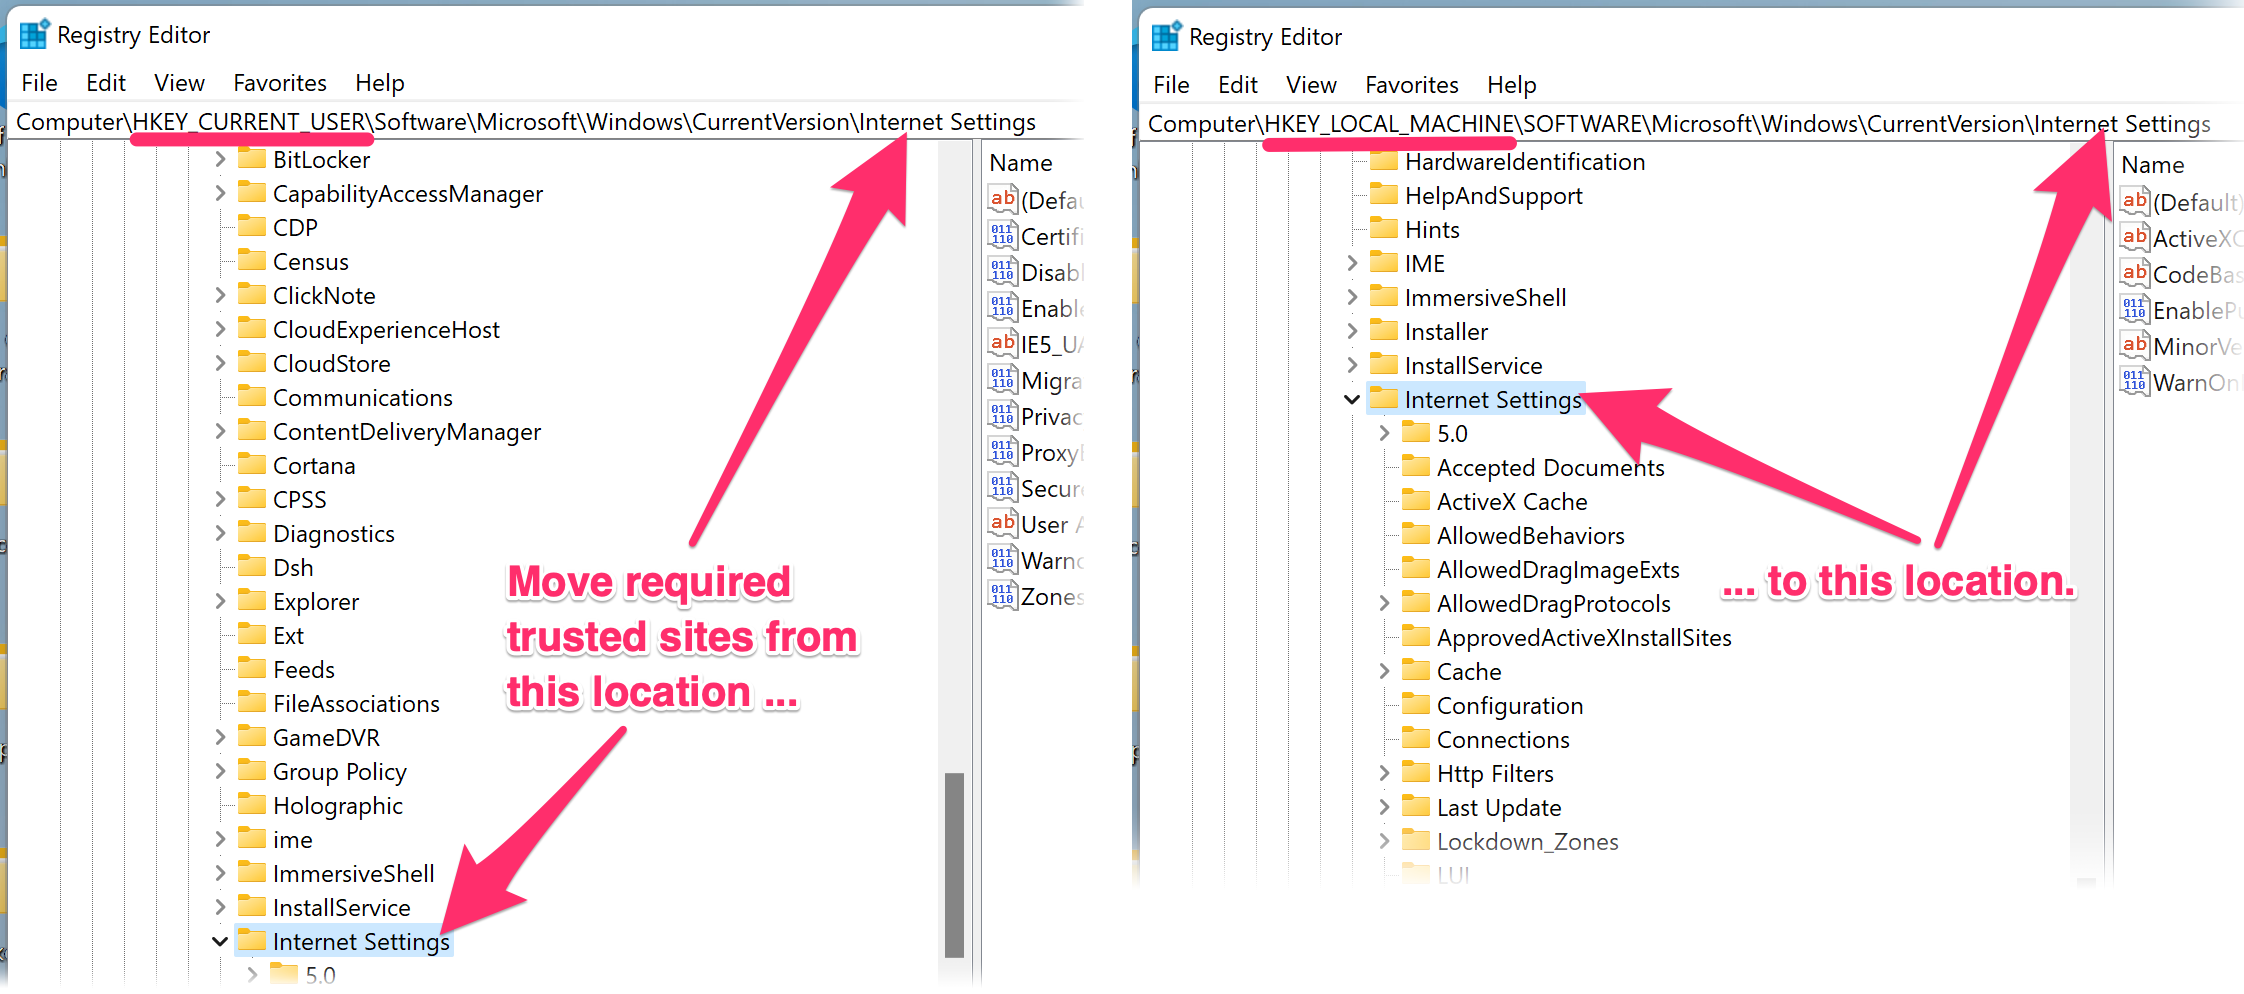 Trusted Sites locations in the Registry Editor